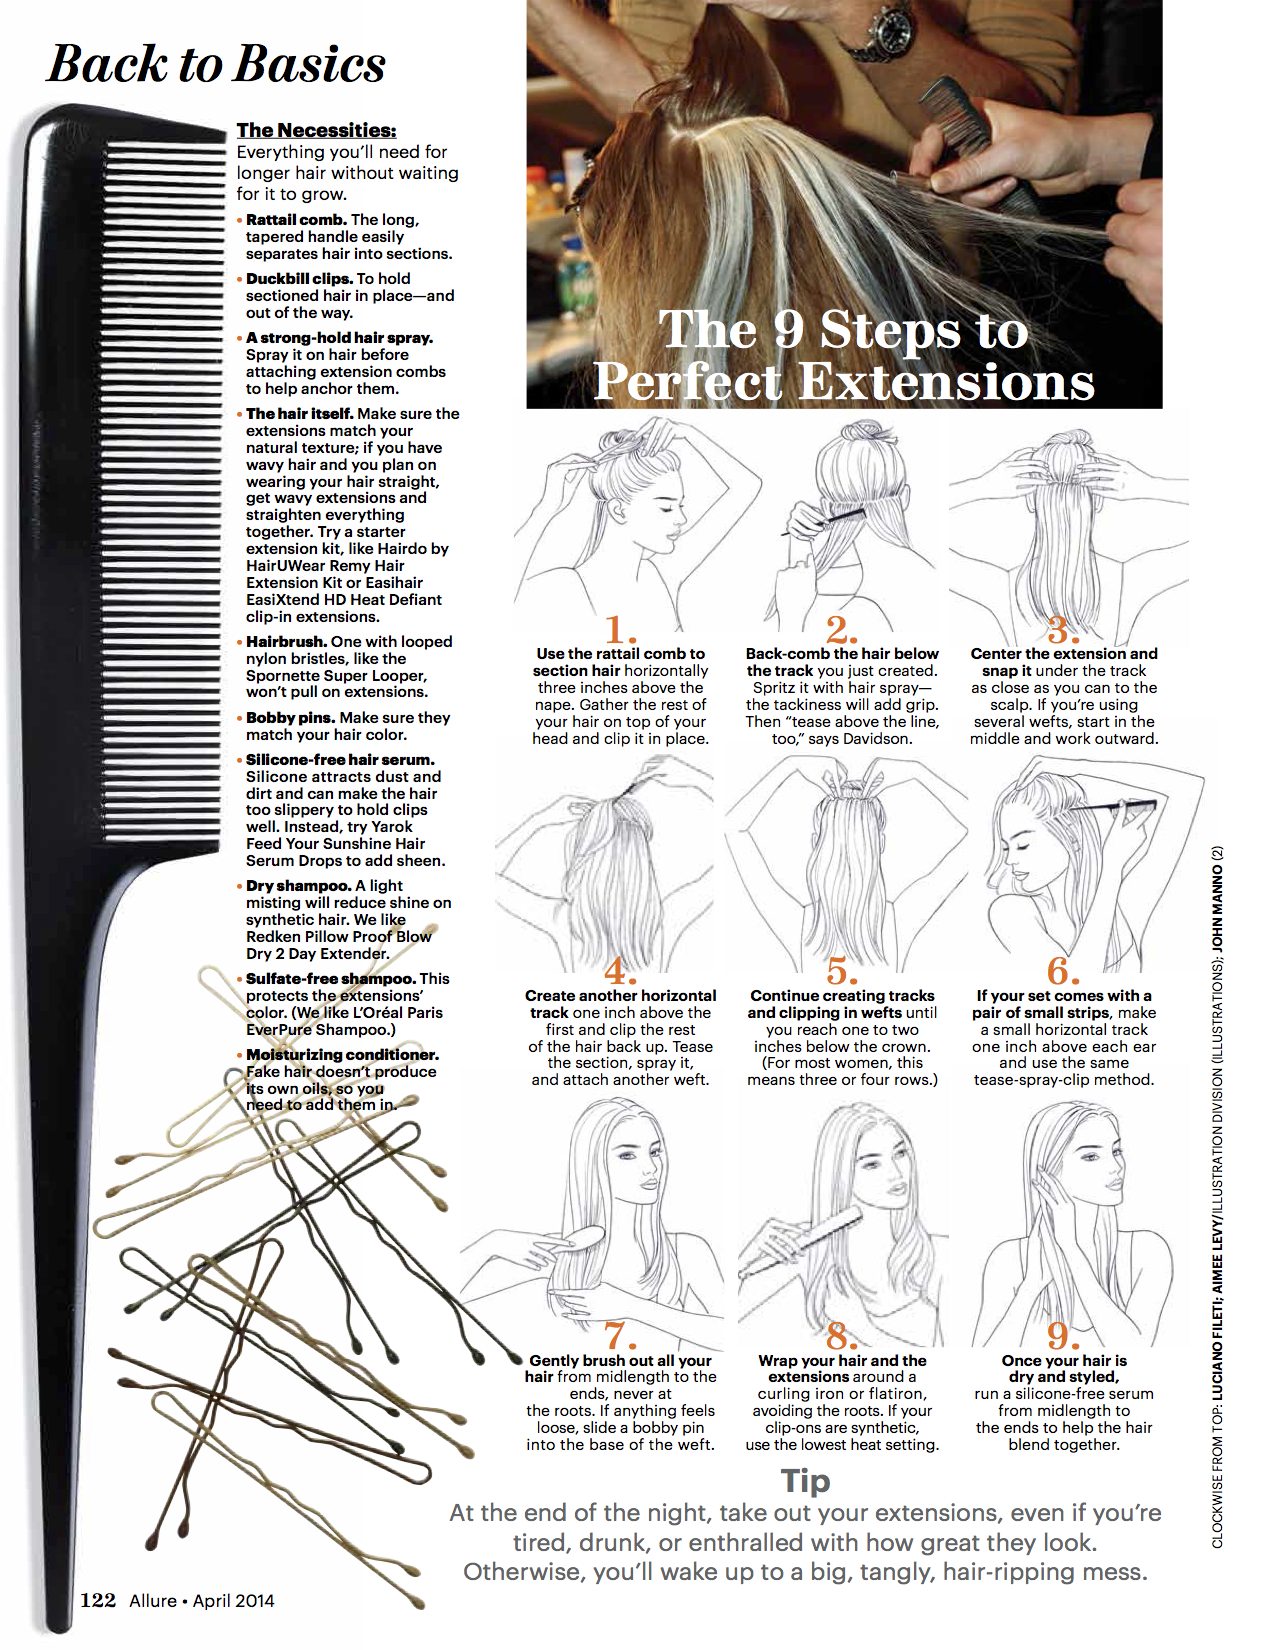 hair_extensions_Allure